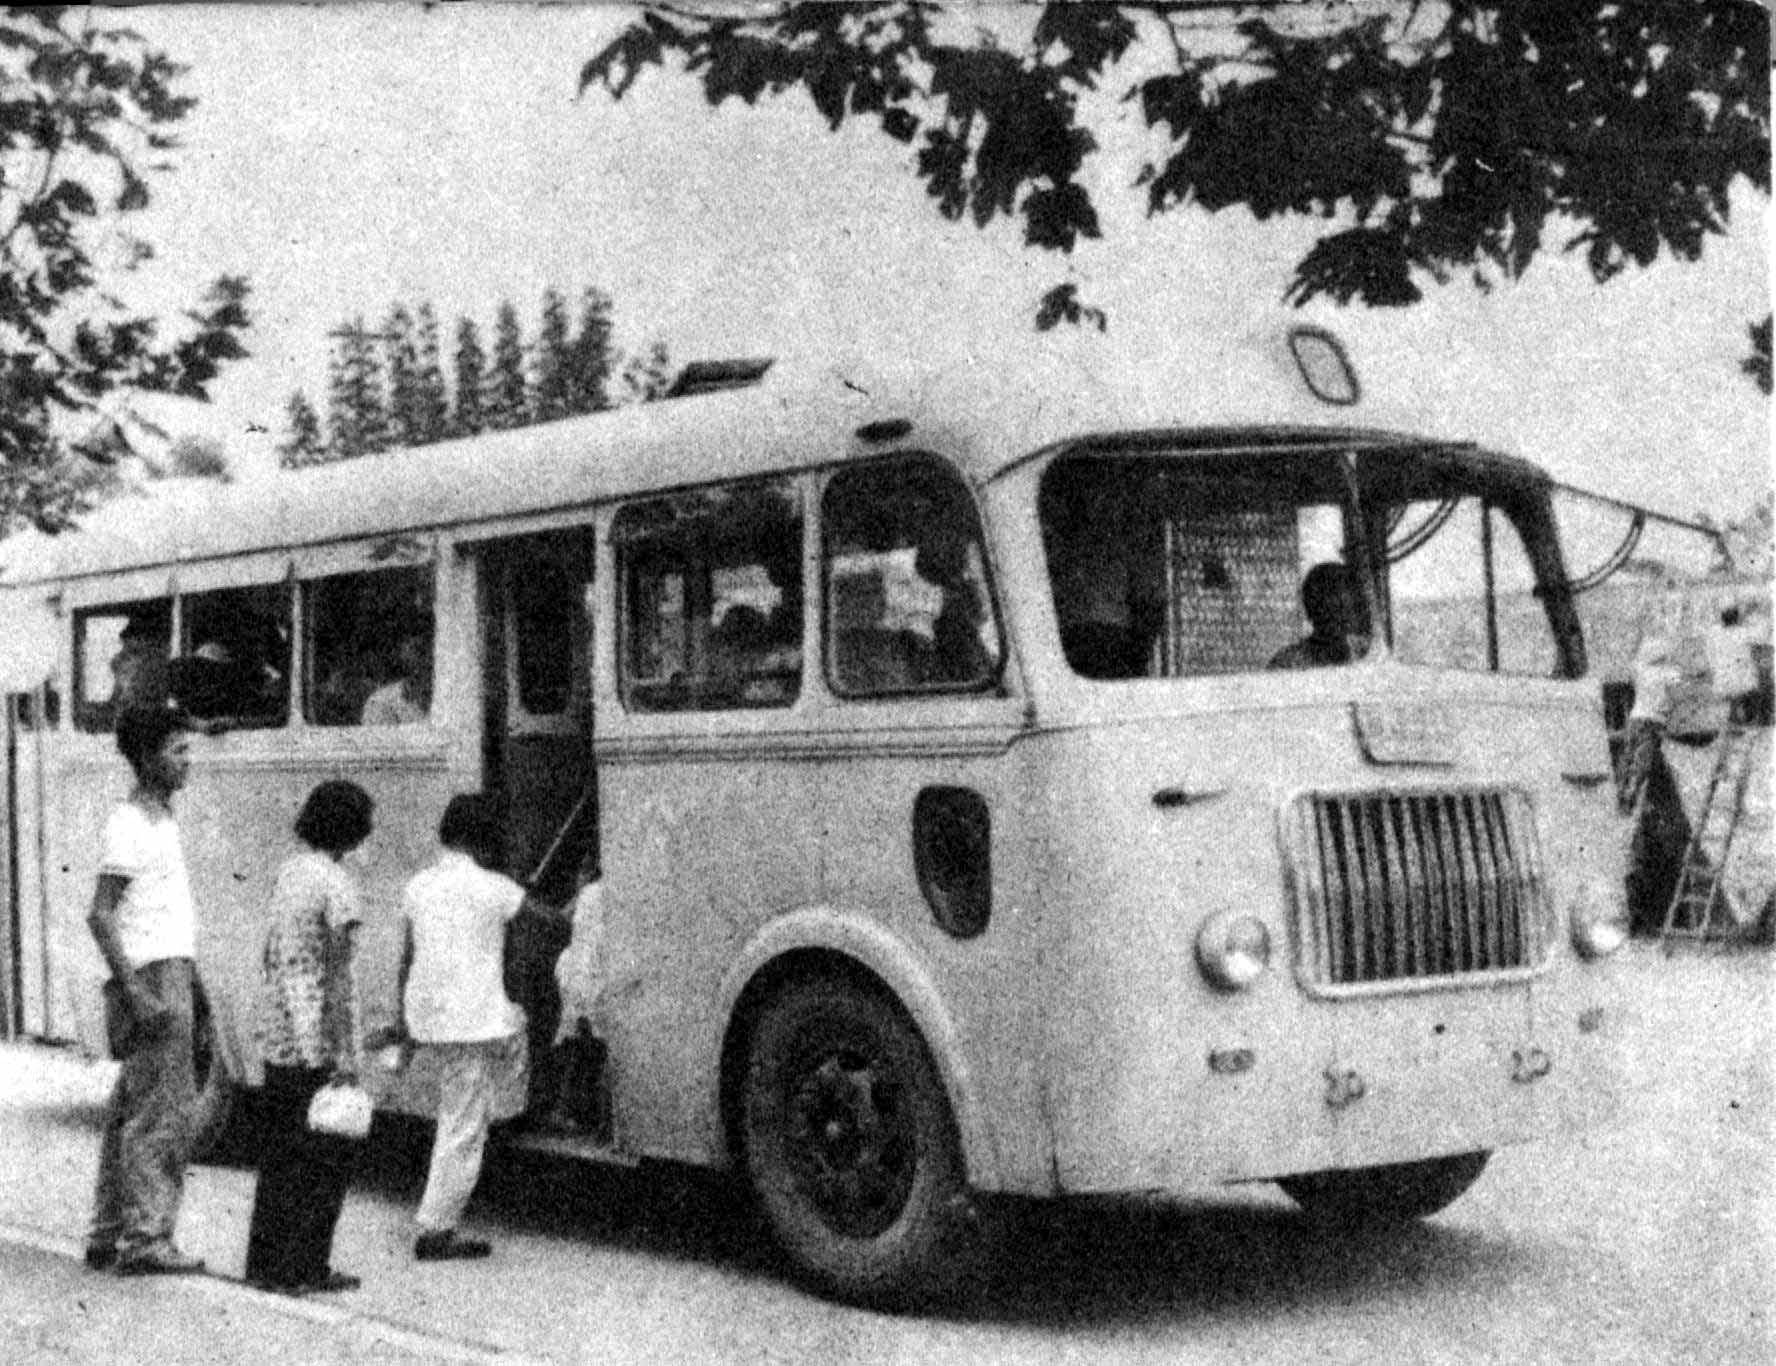 There were very few buses in the 1950s.